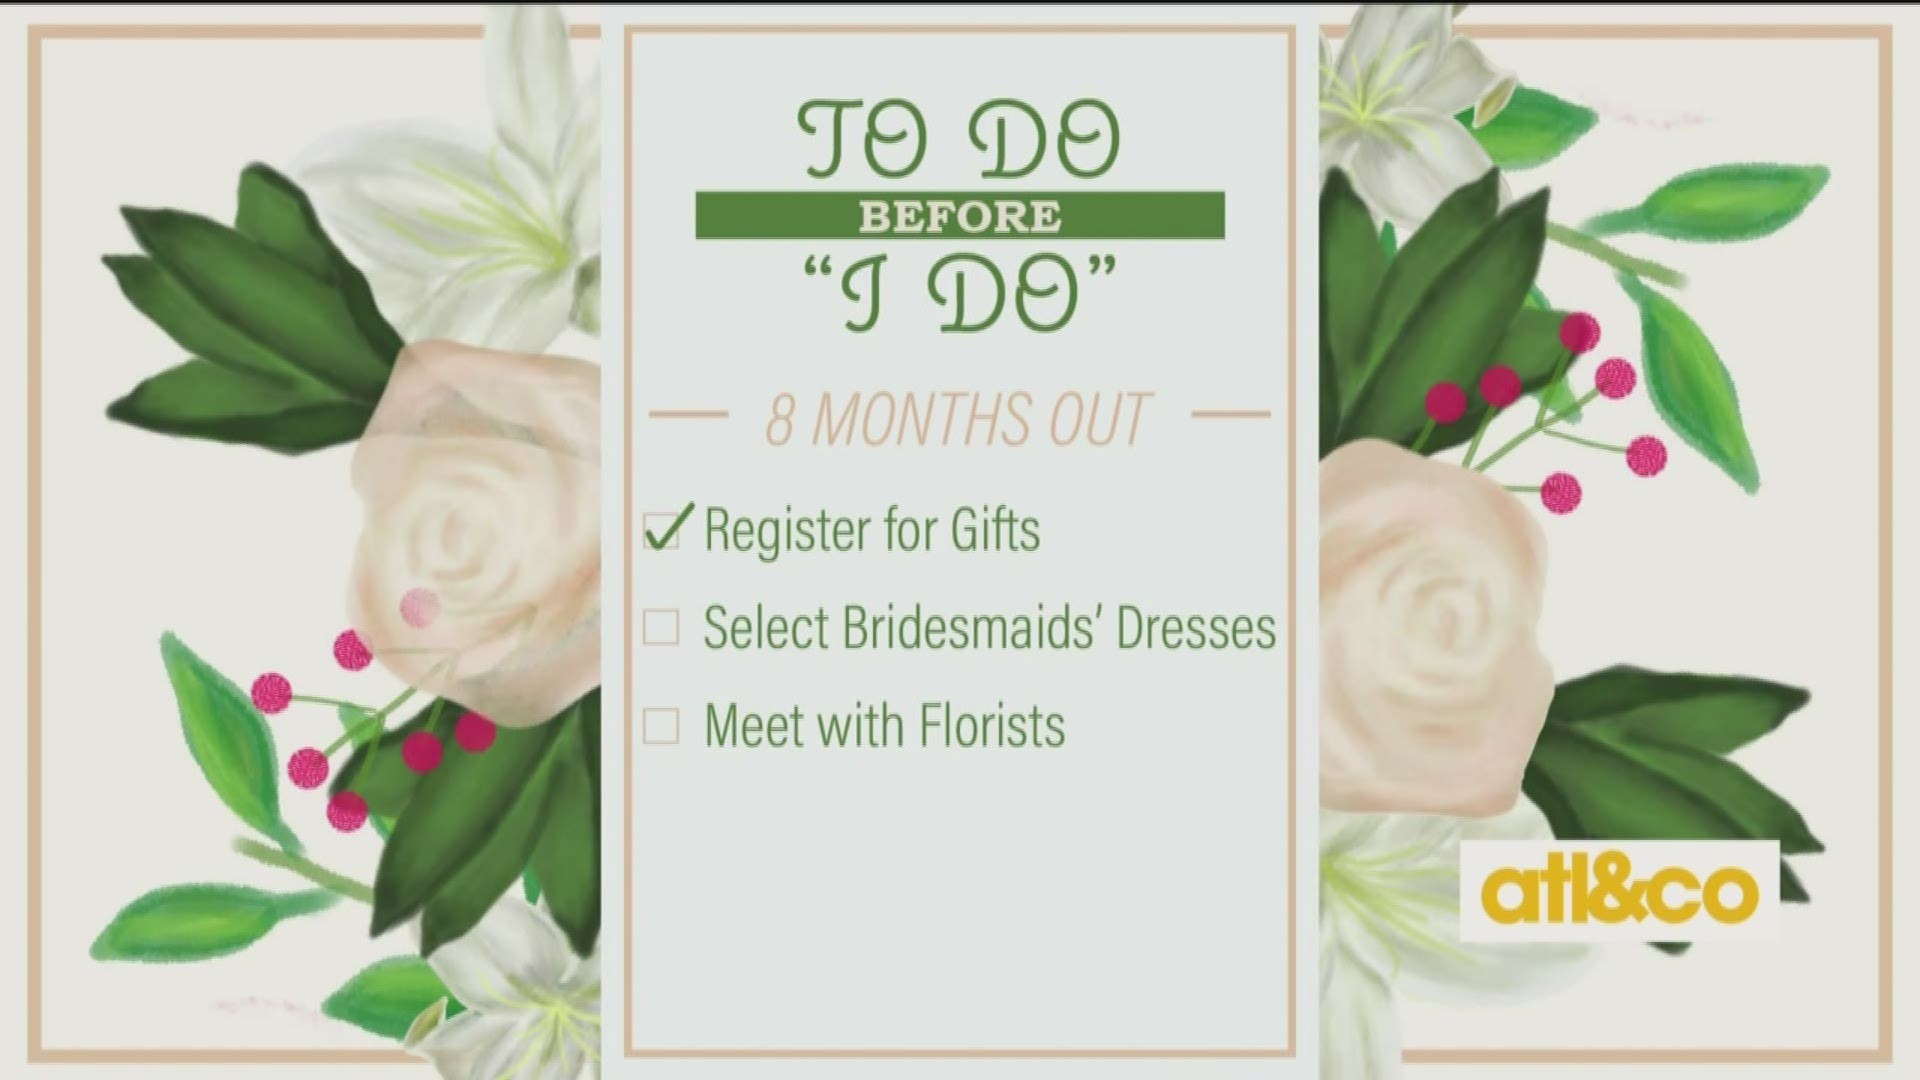 Wedding planning expert Renee Bledsoe shares top tips for brides-to-be 8 months out!